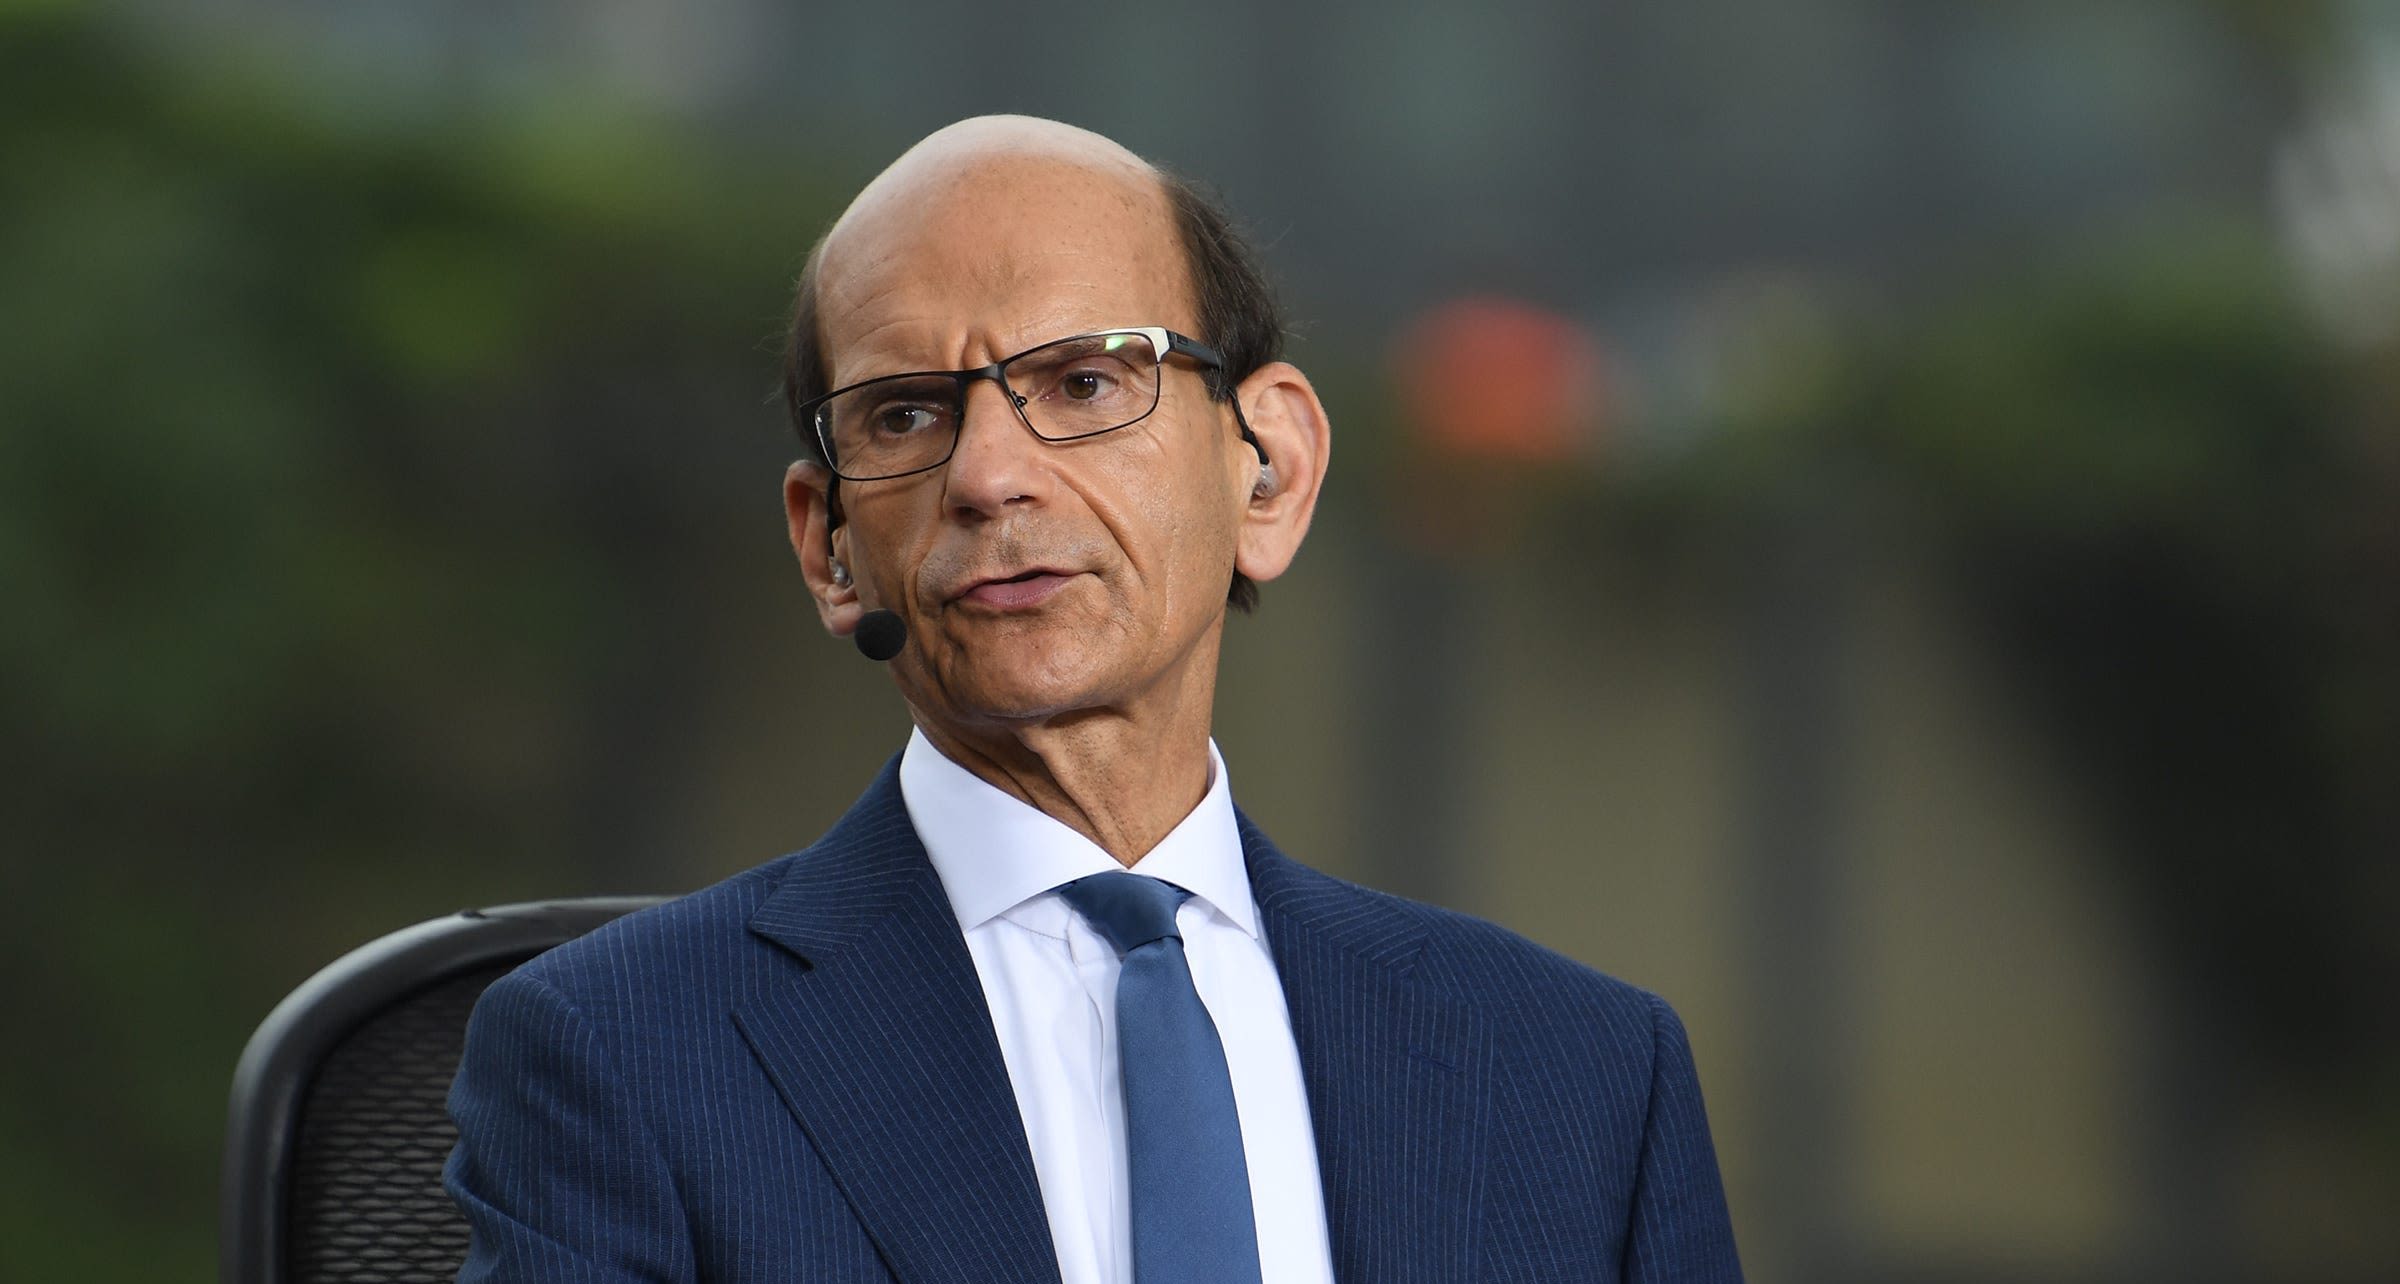 Paul Finebaum explains why Alabama is not a national championship team